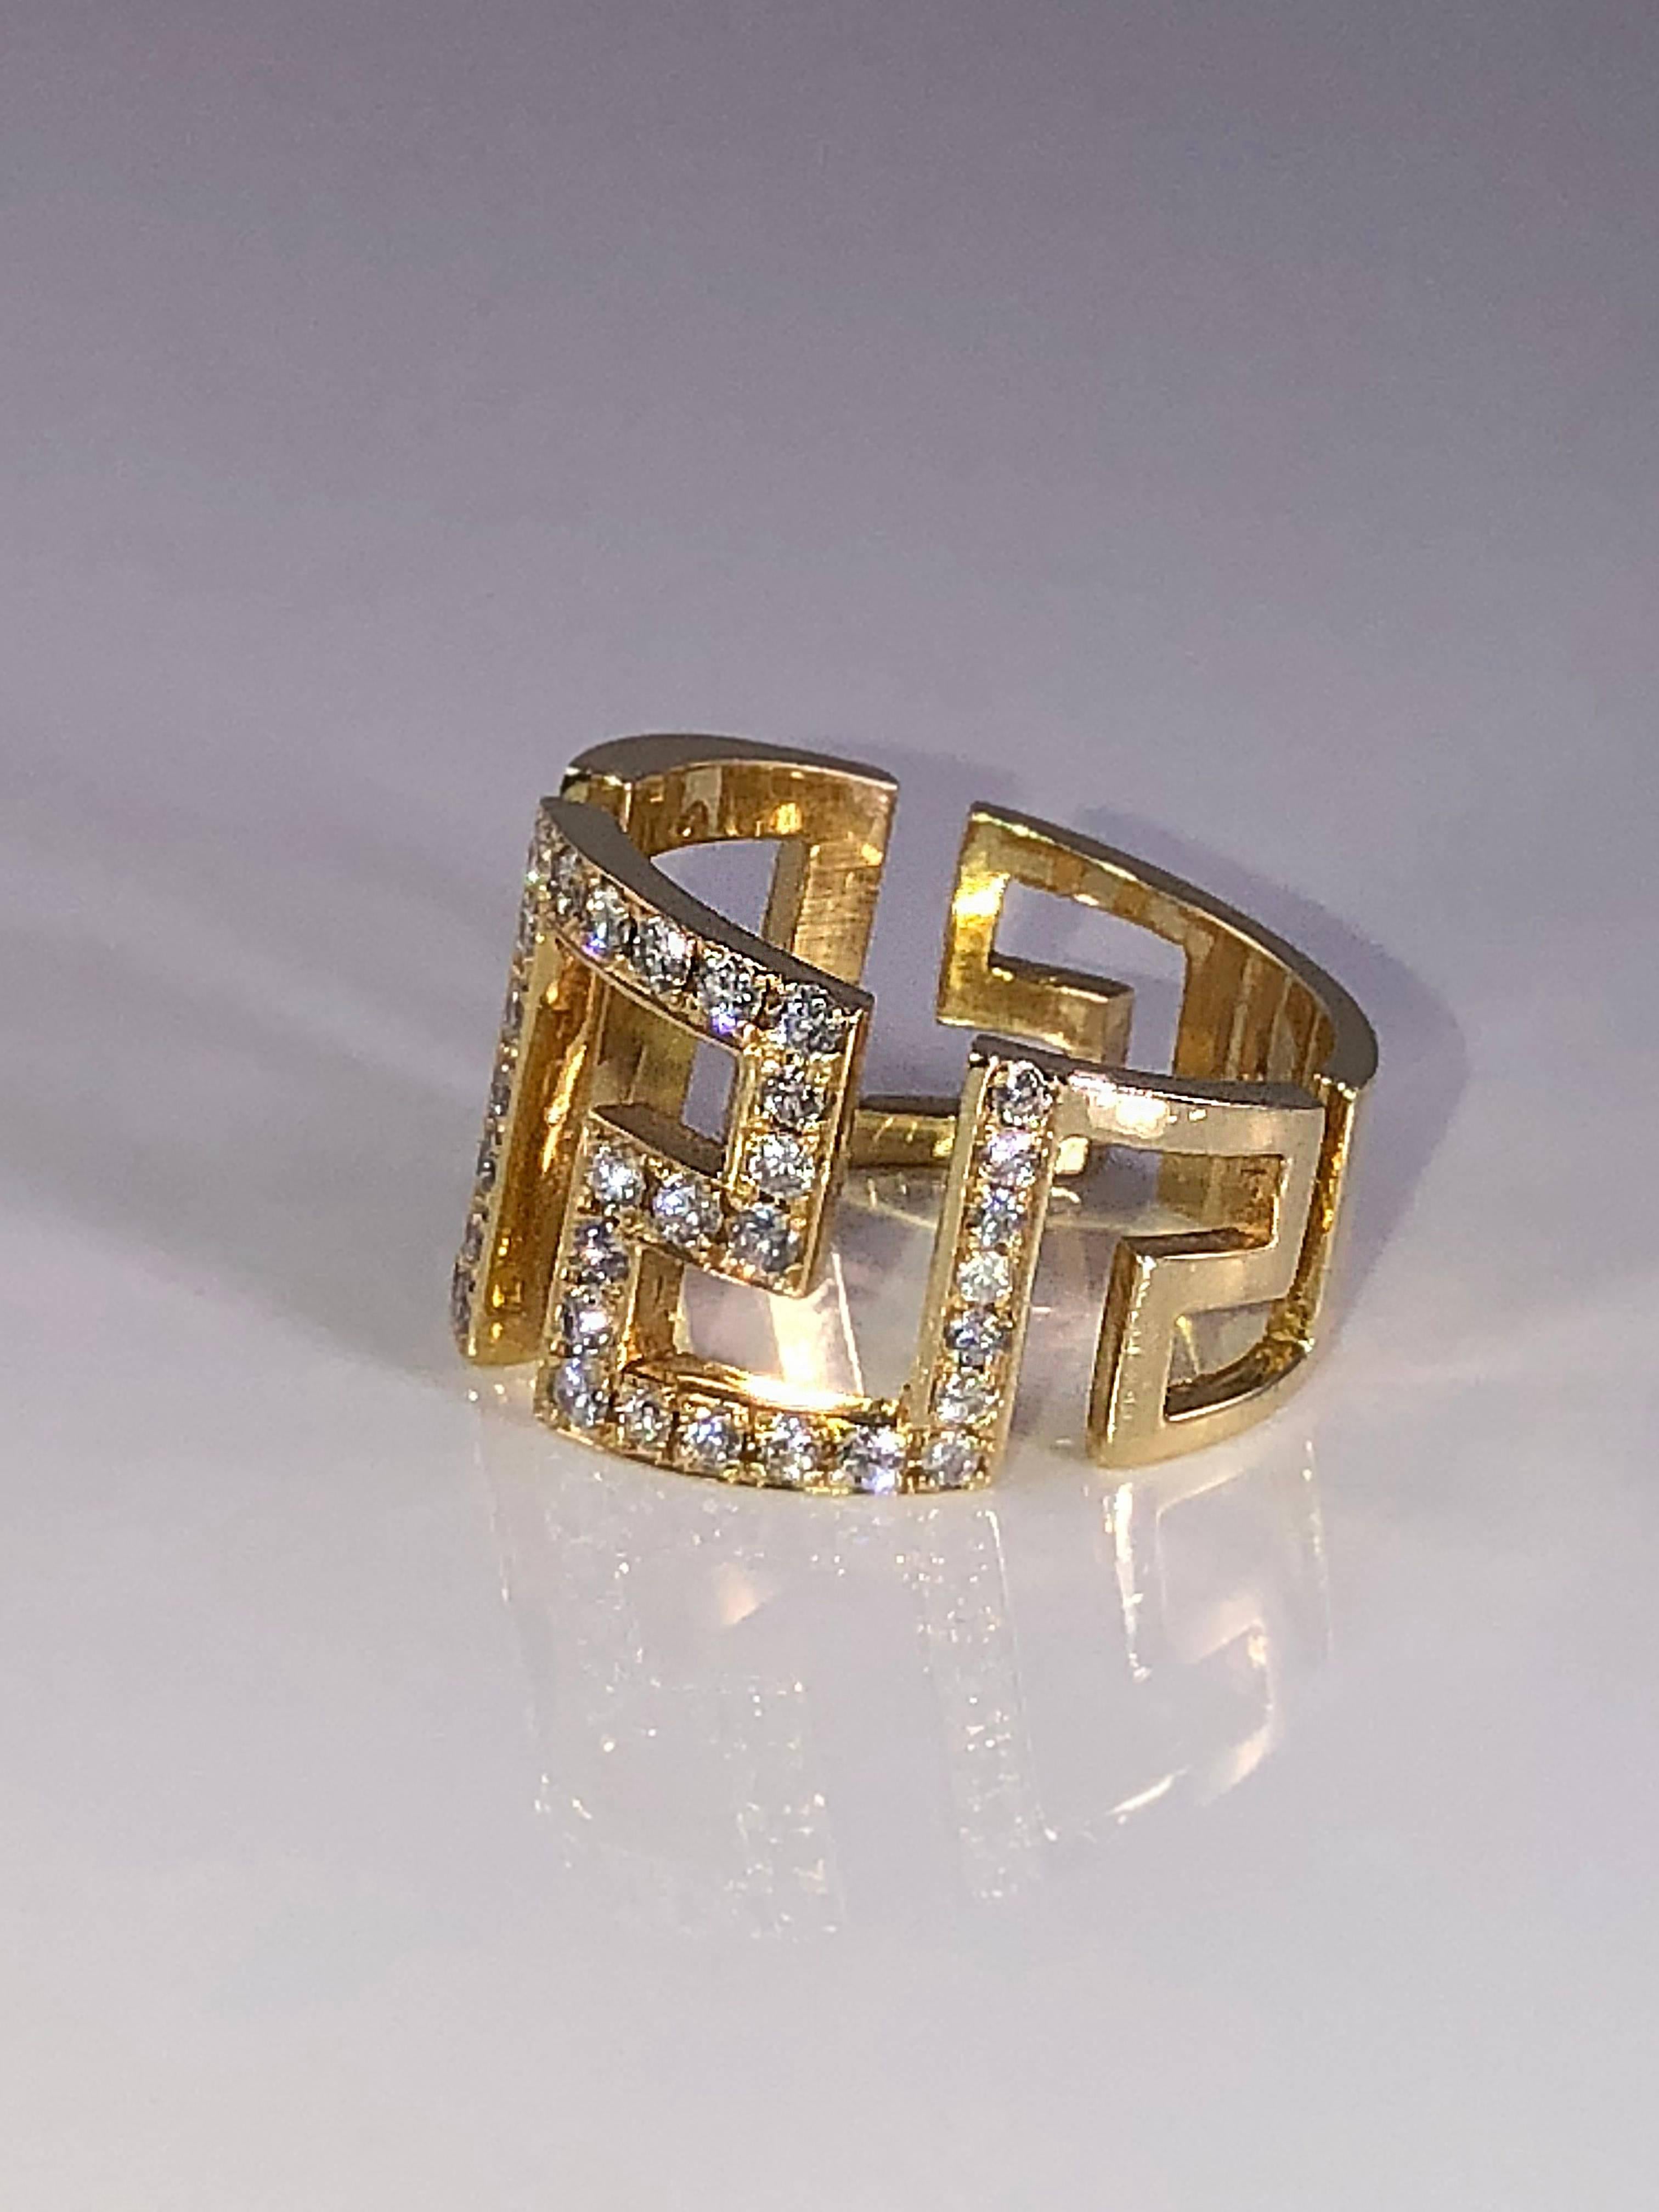 S. Georgios designer 18 Karat Yellow Gold Hand Made Diamond Ring with the Greek Key design that symbolizes eternity - the symbol of long life. The Ring is decorated with White Brilliant cut Diamonds total weight of 0.67 Carat and can also be ordered